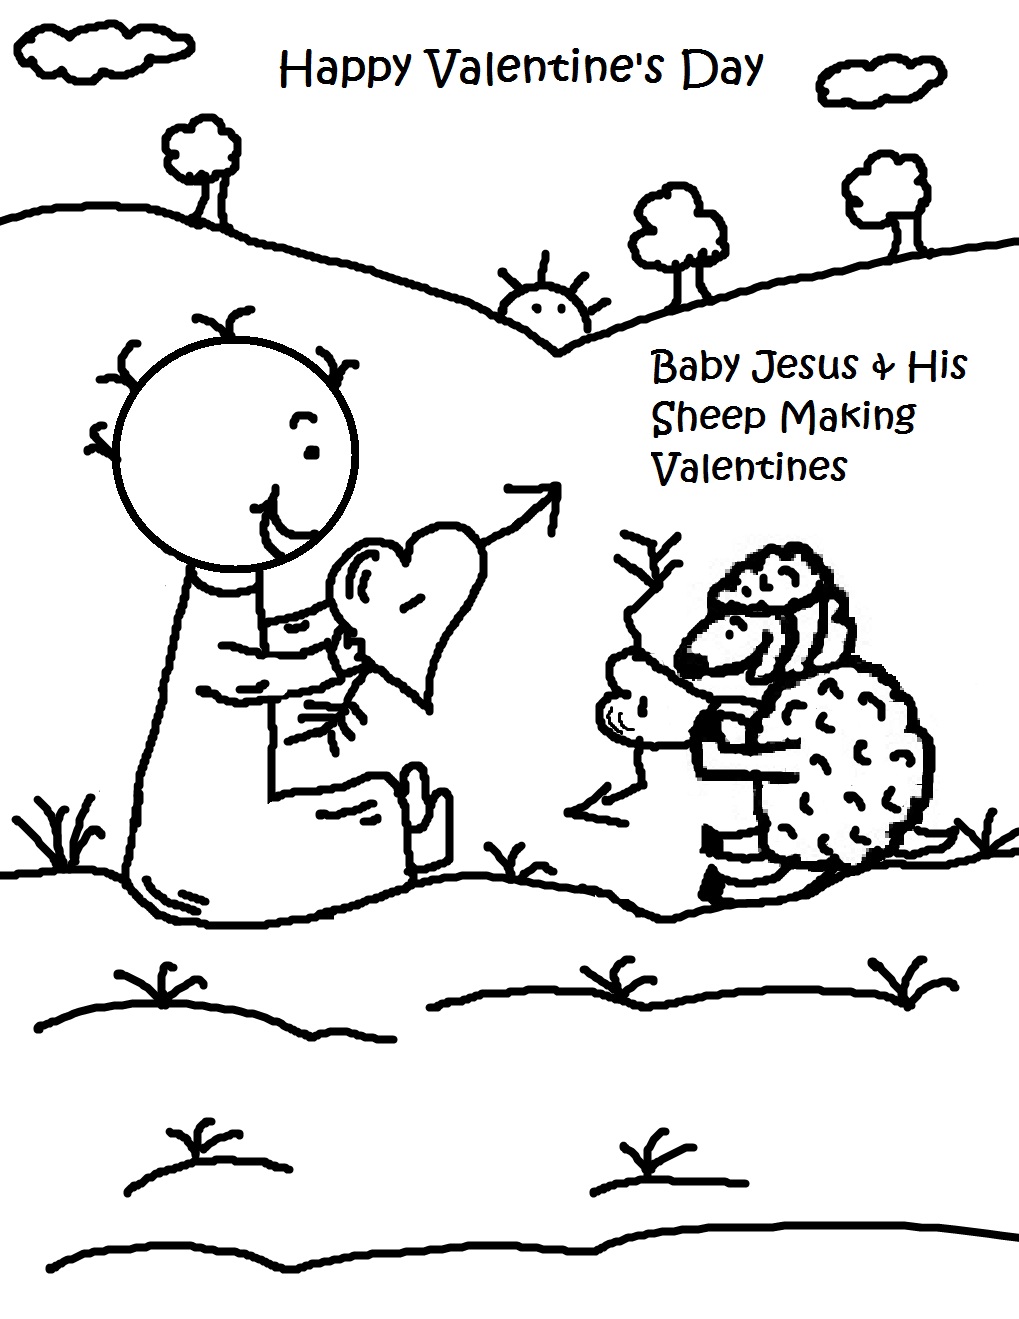 valentins day crafts an coloring pages - photo #17